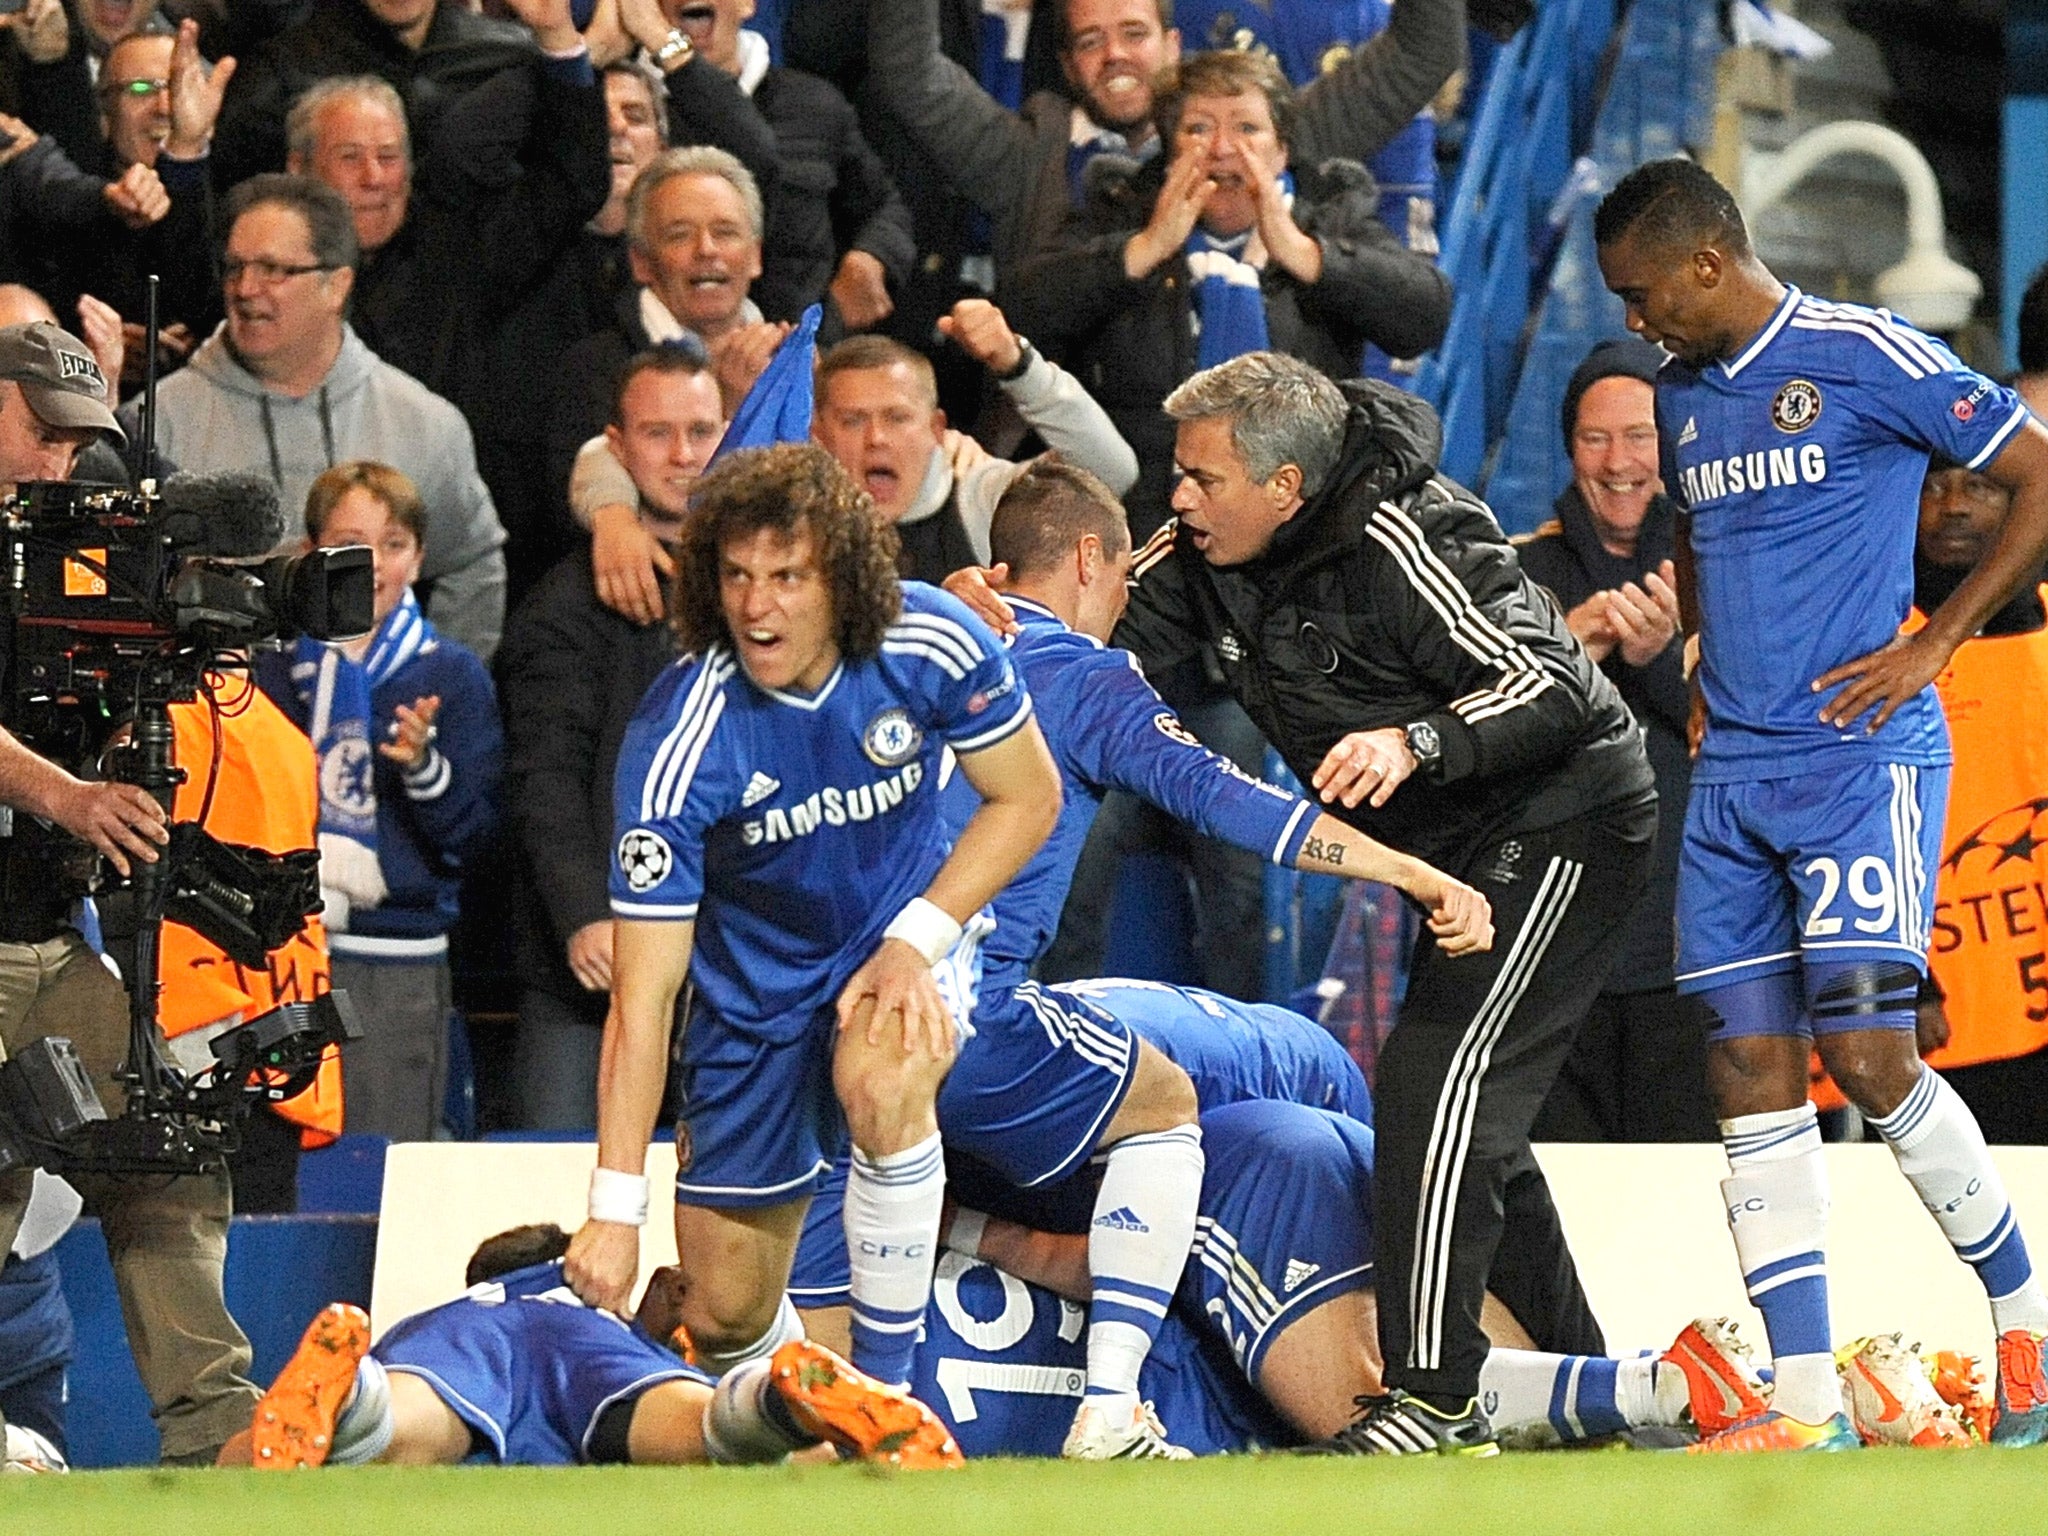 Jose Mourinho joins in the bundle with his players celebrating Chelsea’s late goal